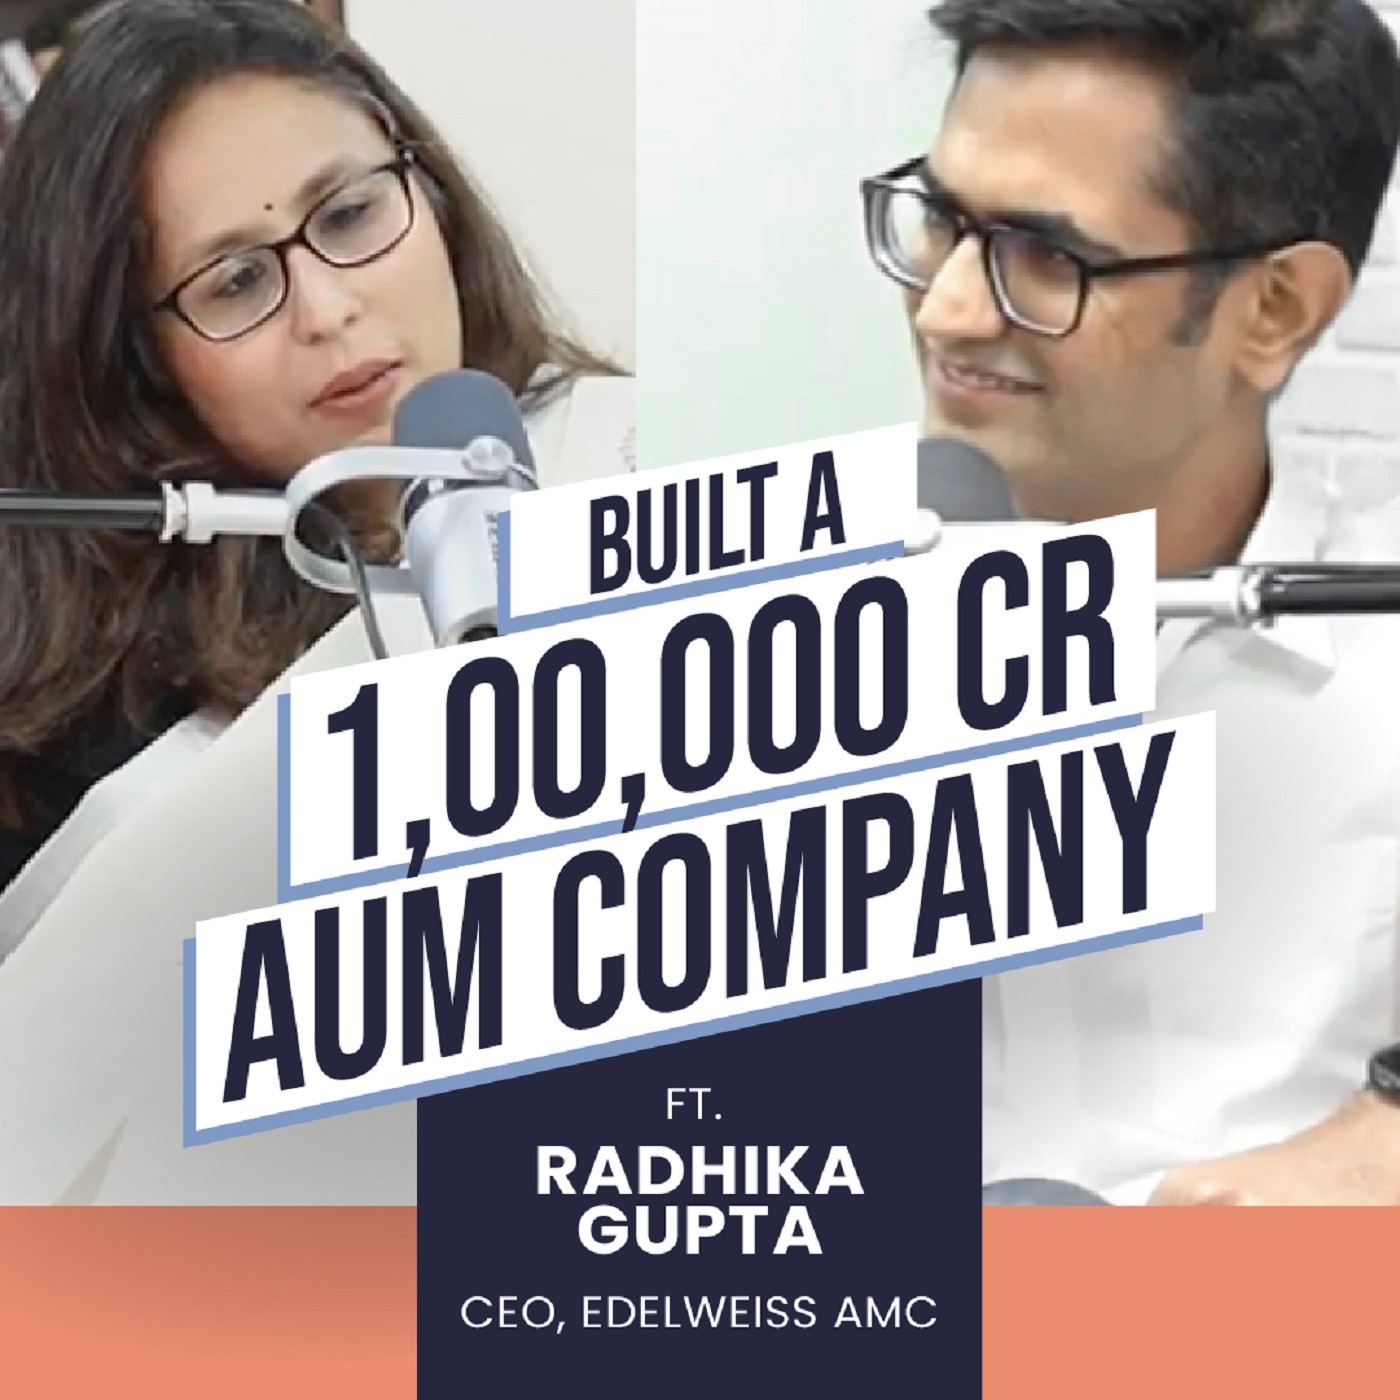 Sold 200 CR company and now manages AUM worth 1 LAKH CR | Radhika Gupta, CEO - Edelweiss AMC | EP 7